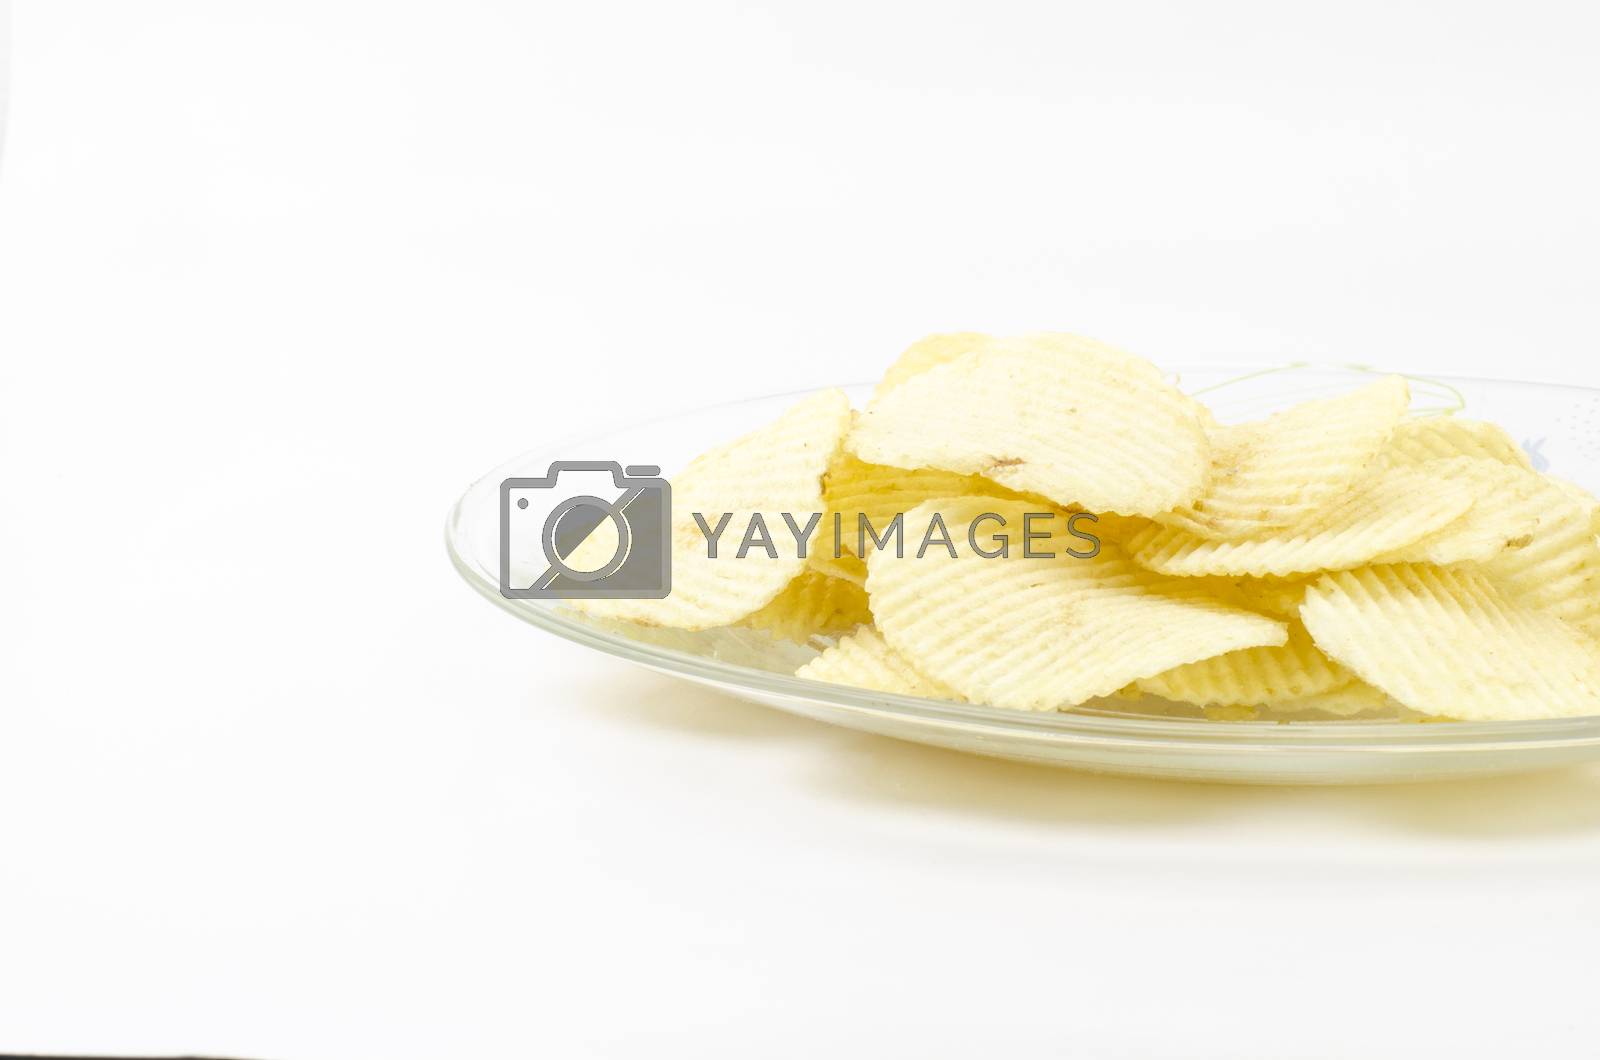 Royalty free image of snack potato chips isolated on white  by ammza12